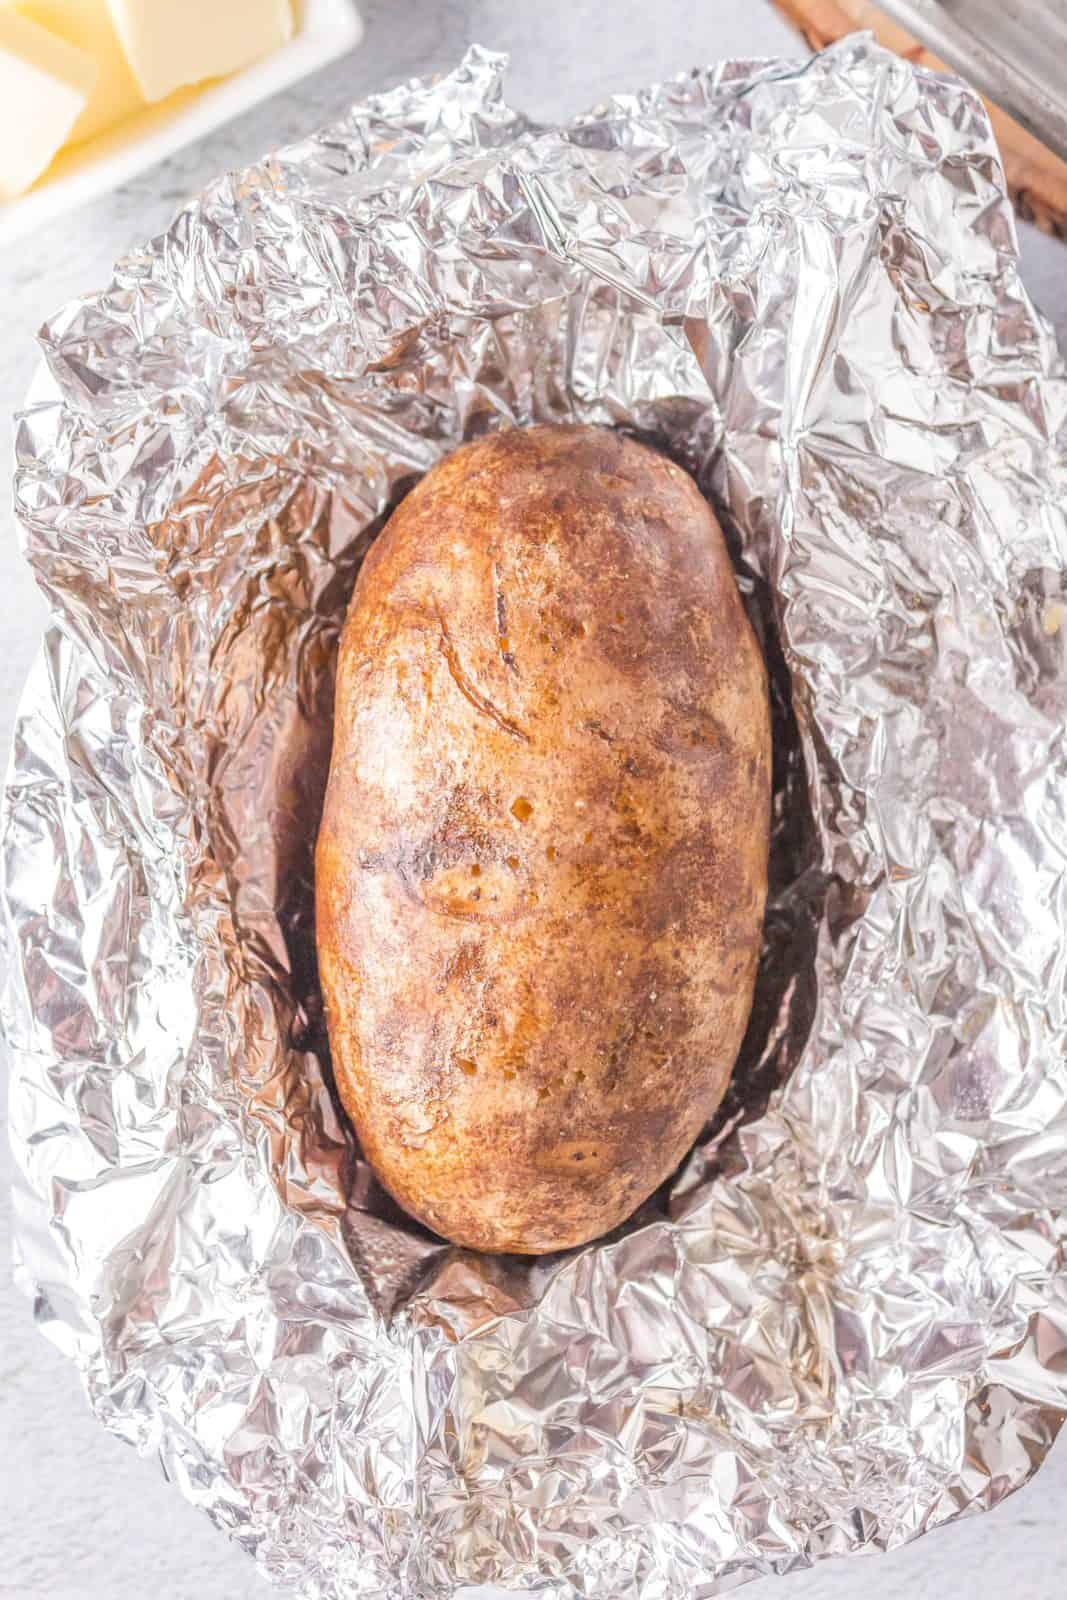 Finished potato unwrapped in foil.